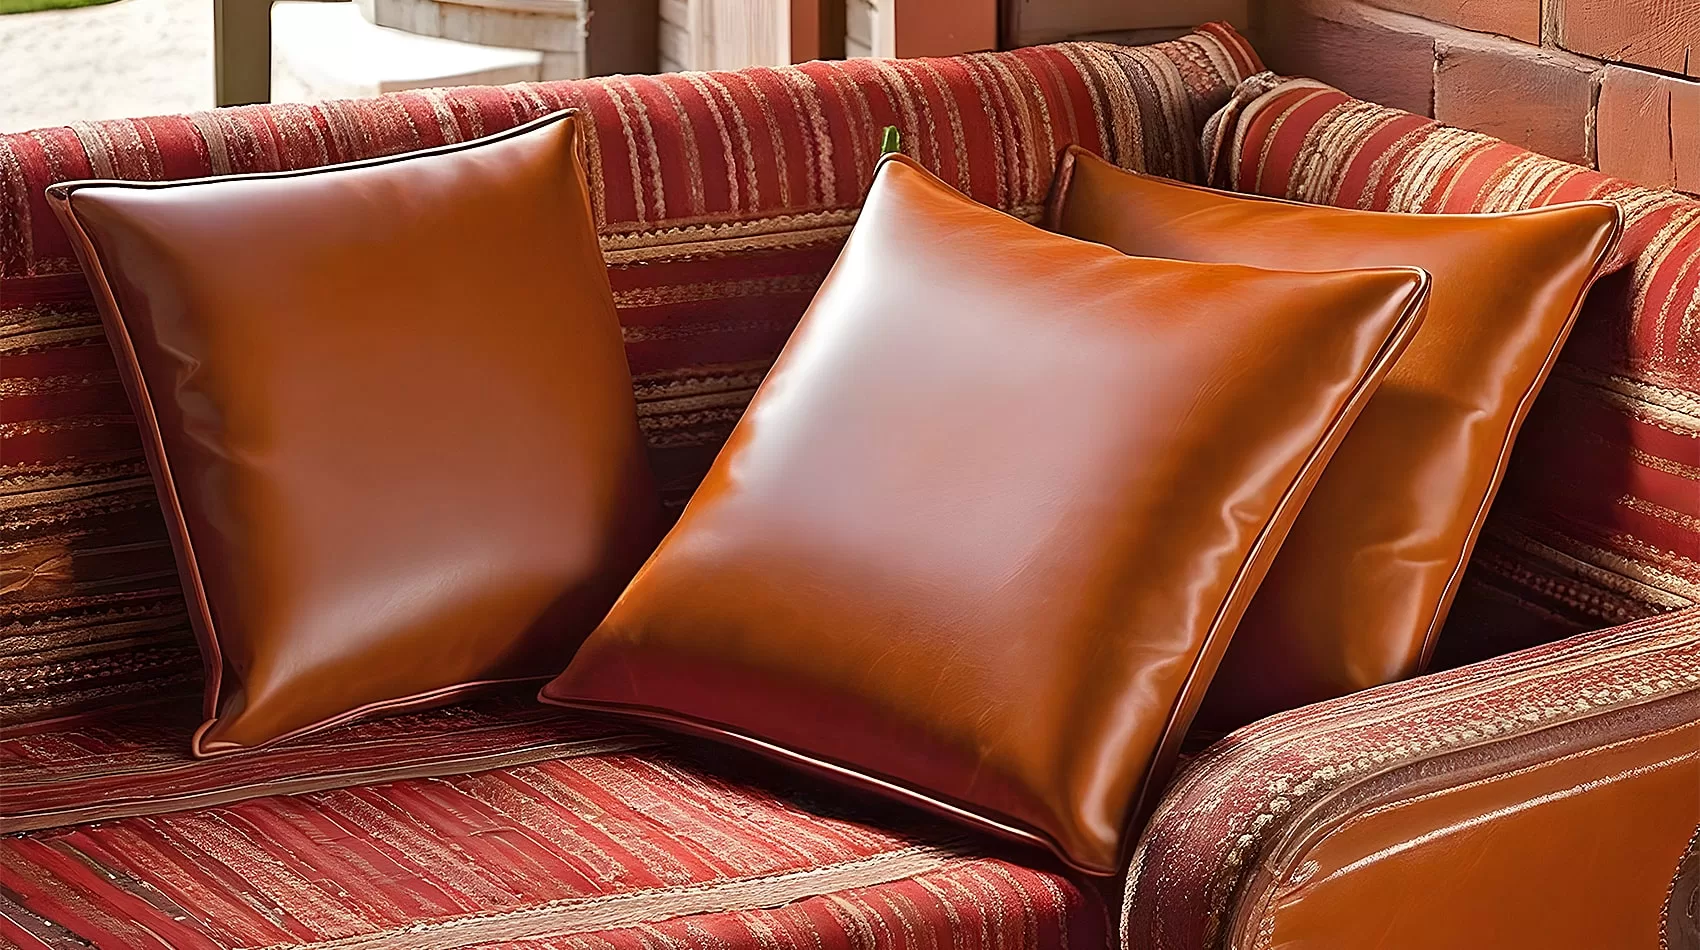 Leather Covers | Leather Couch Cushion Covers | Leather Sofa Cushion Covers